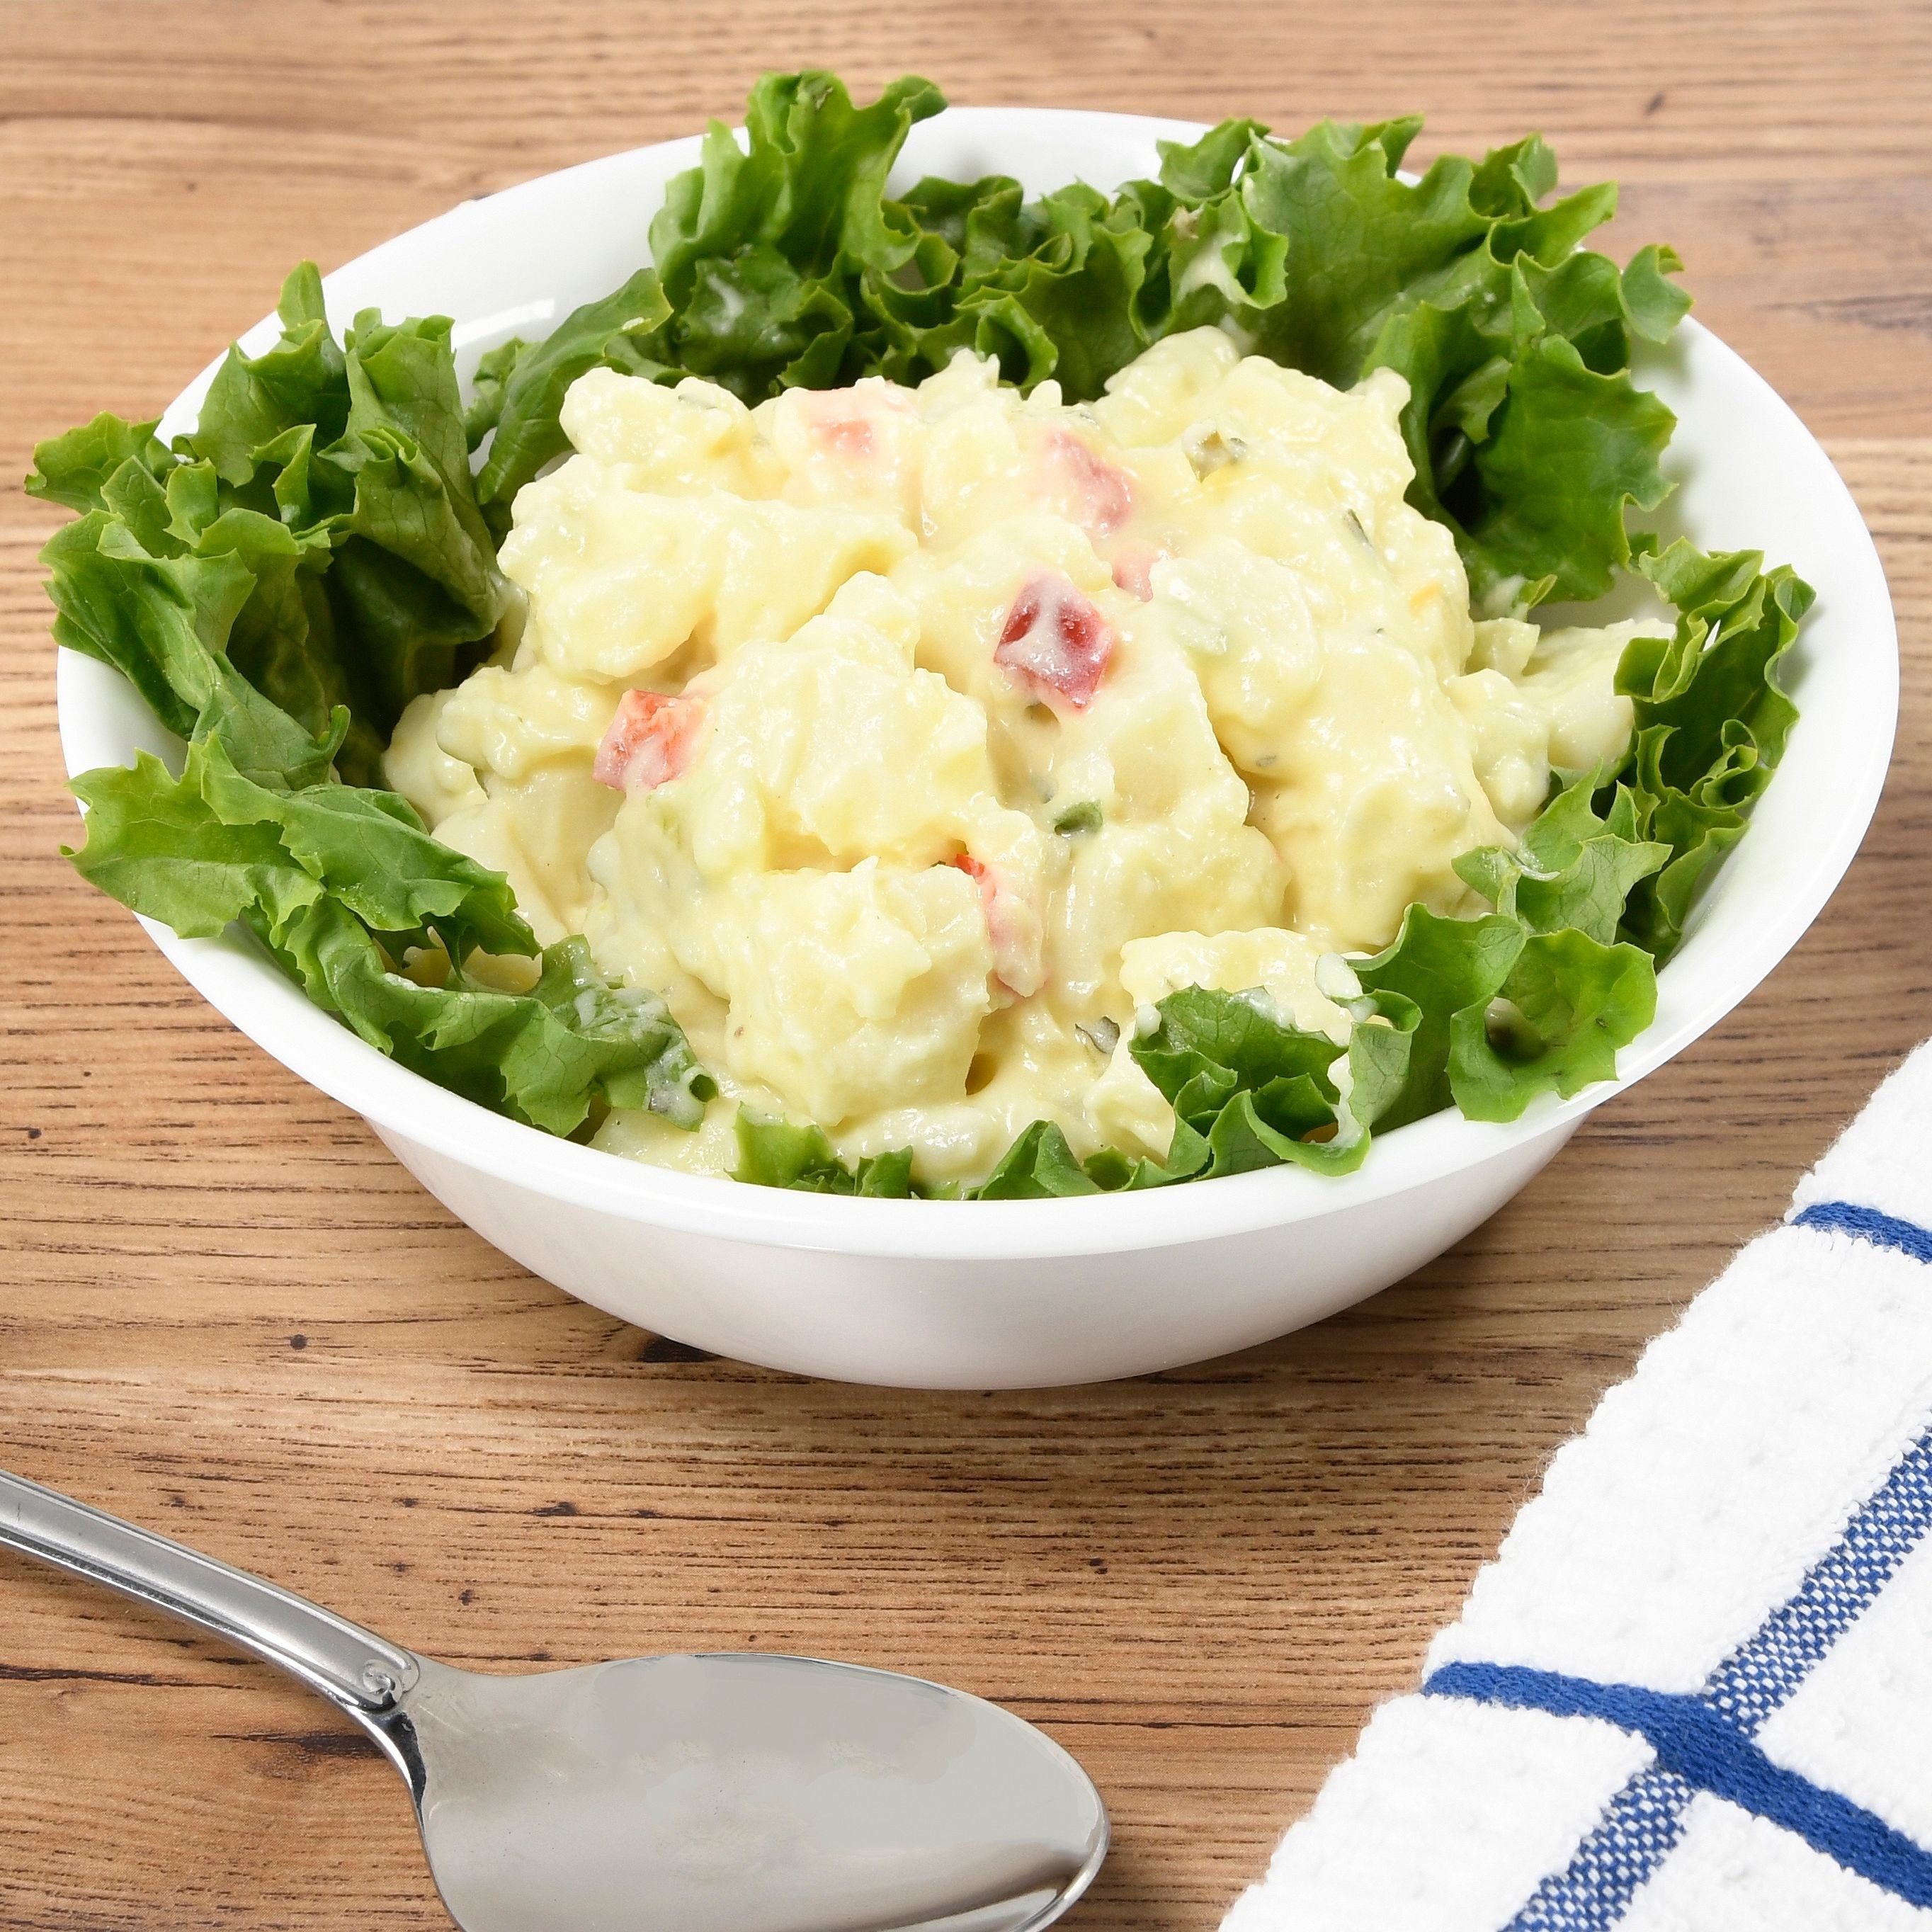 A bowl of the potato salad on a table